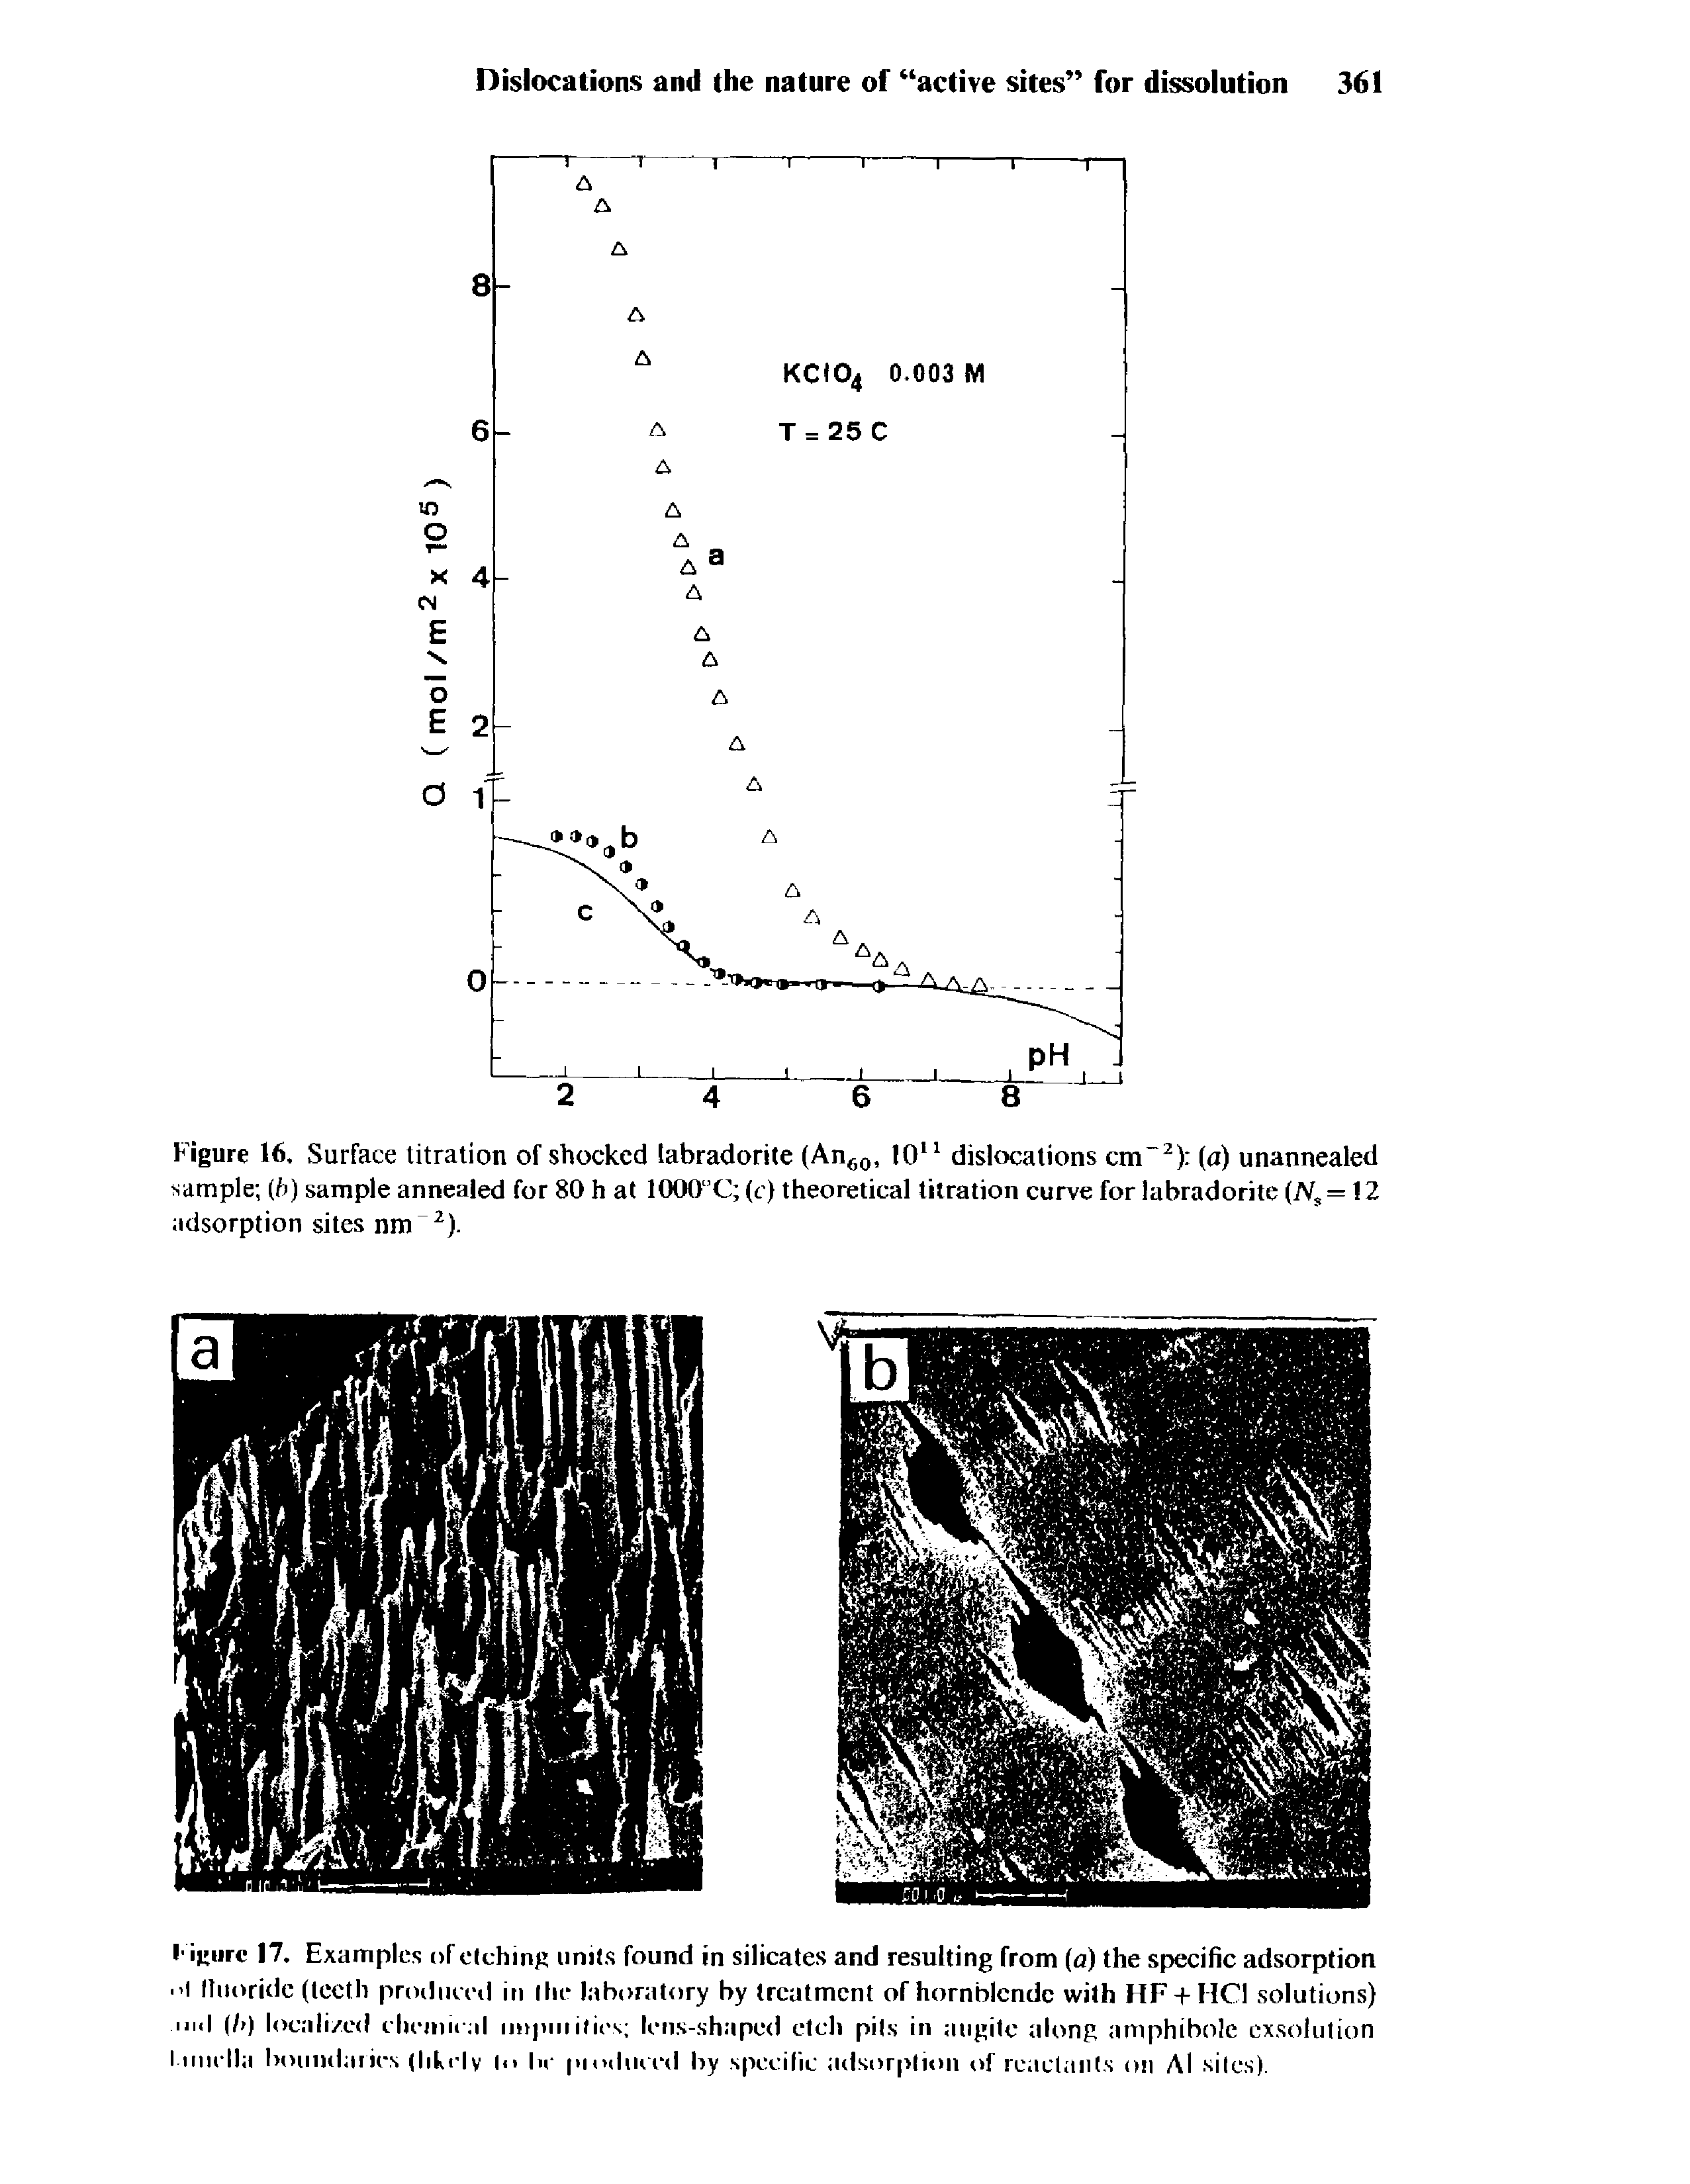 Figure 16, Surface titration of shocked labradorite (An60, 1011 dislocations cm-2) (a) unannealed sample (b) sample annealed for 80 h at 1000 C (c) theoretical titration curve for labradorite (JVS= 12 adsorption sites nm 2).